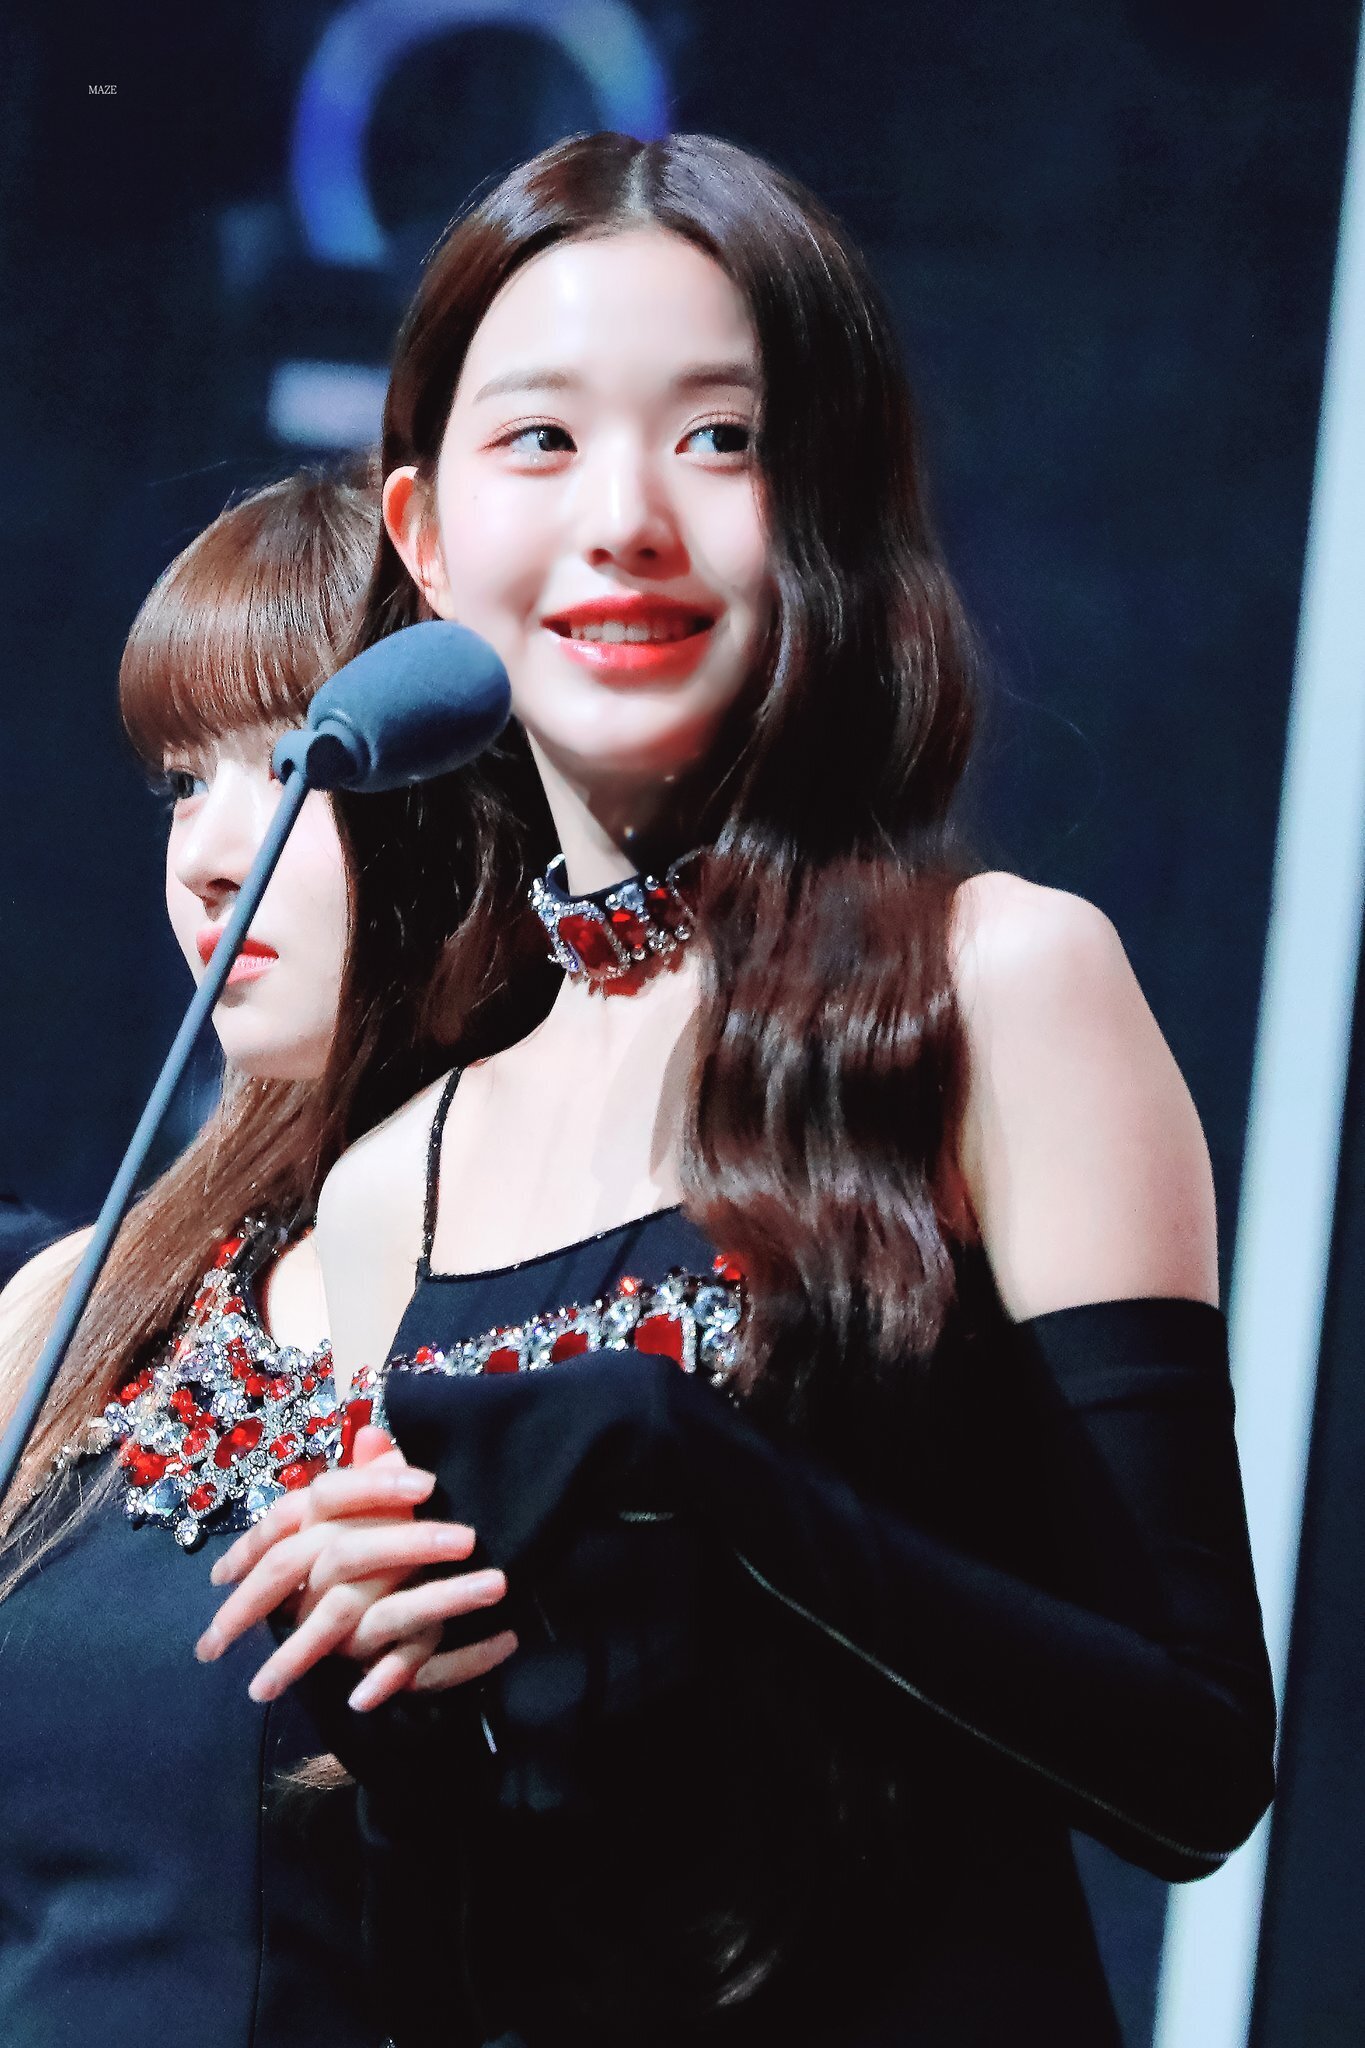 221008 IVE Wonyoung - The Fact Music Awards | kpopping